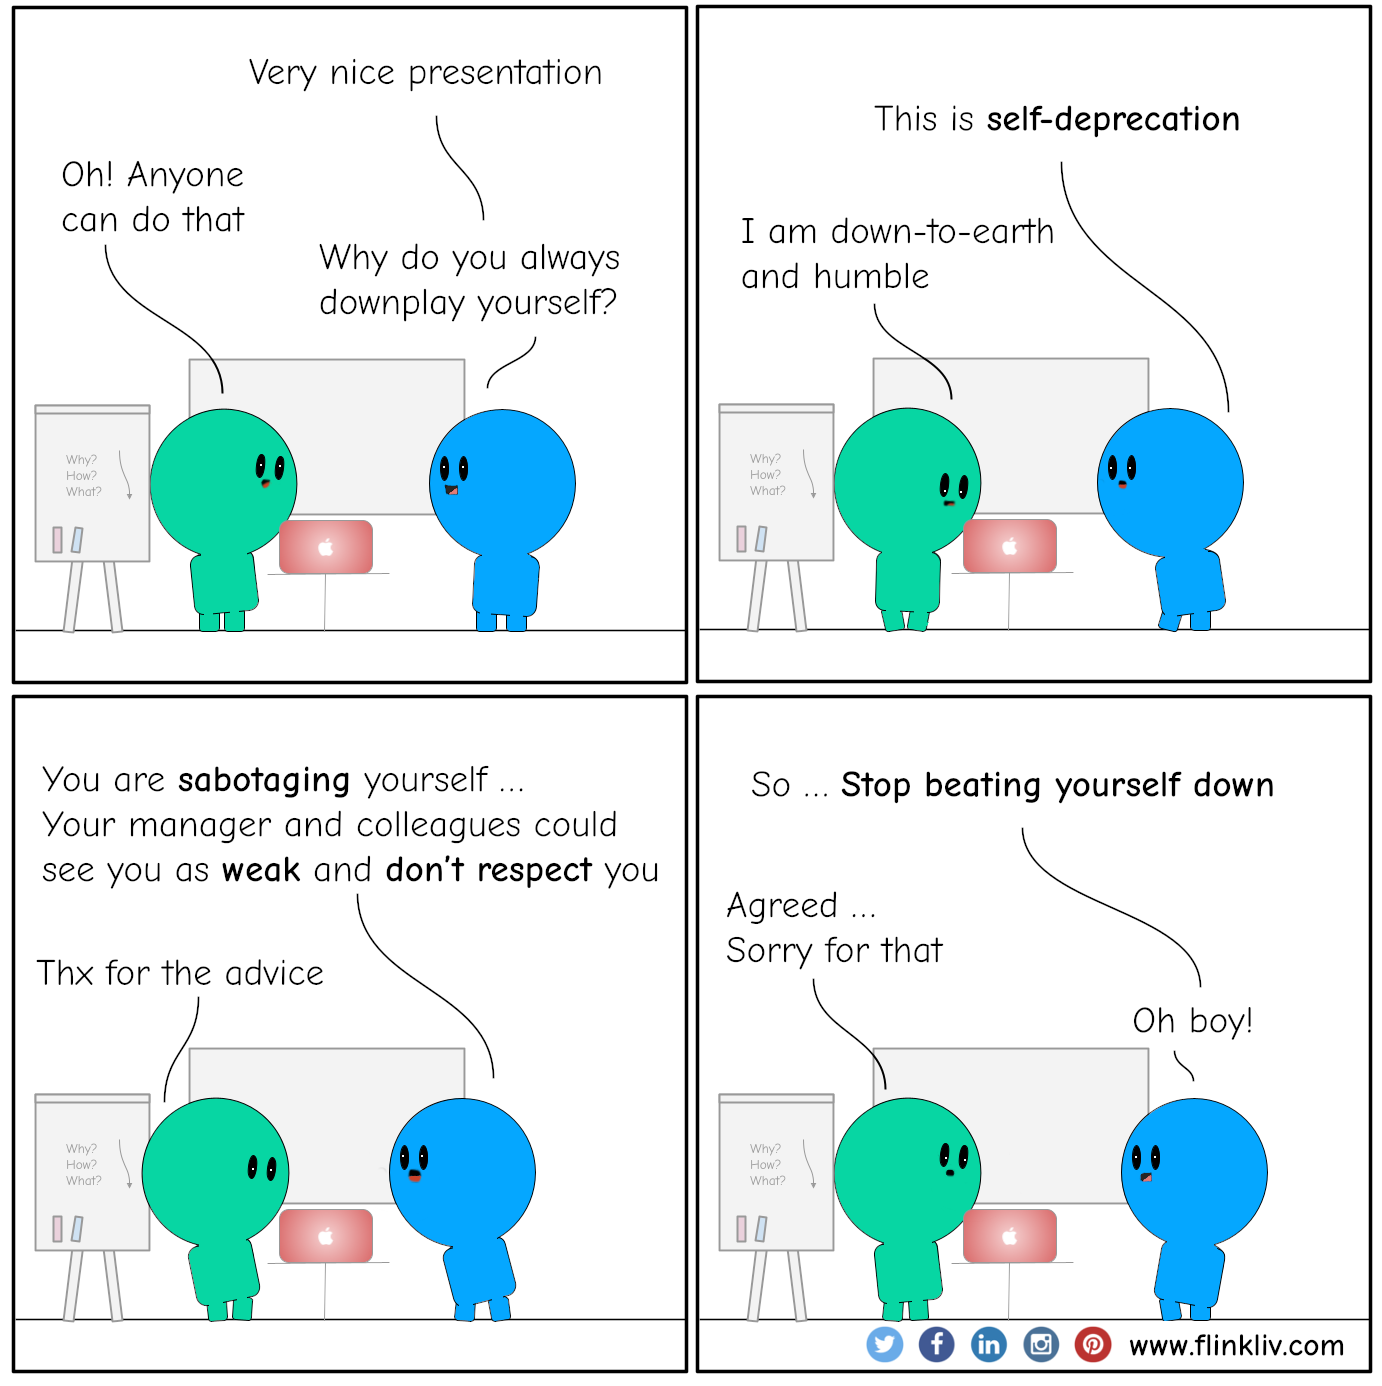 Conversation between A and B about Toxic Self-deprecation. B: Nice presentation; Very creative A: Thx. Anyone can do that B: Why do you always downplay yourself? A: What? B: This is self-deprecation A: I am down-to-earth and humble B: You are sabotaging yourself; your managers and colleagues might see you as weak and don’t respect you A: Thx for the advice B: So, stop beating yourself down A: Agreed, Sorry for that B: Oh boy! By flinkliv.com